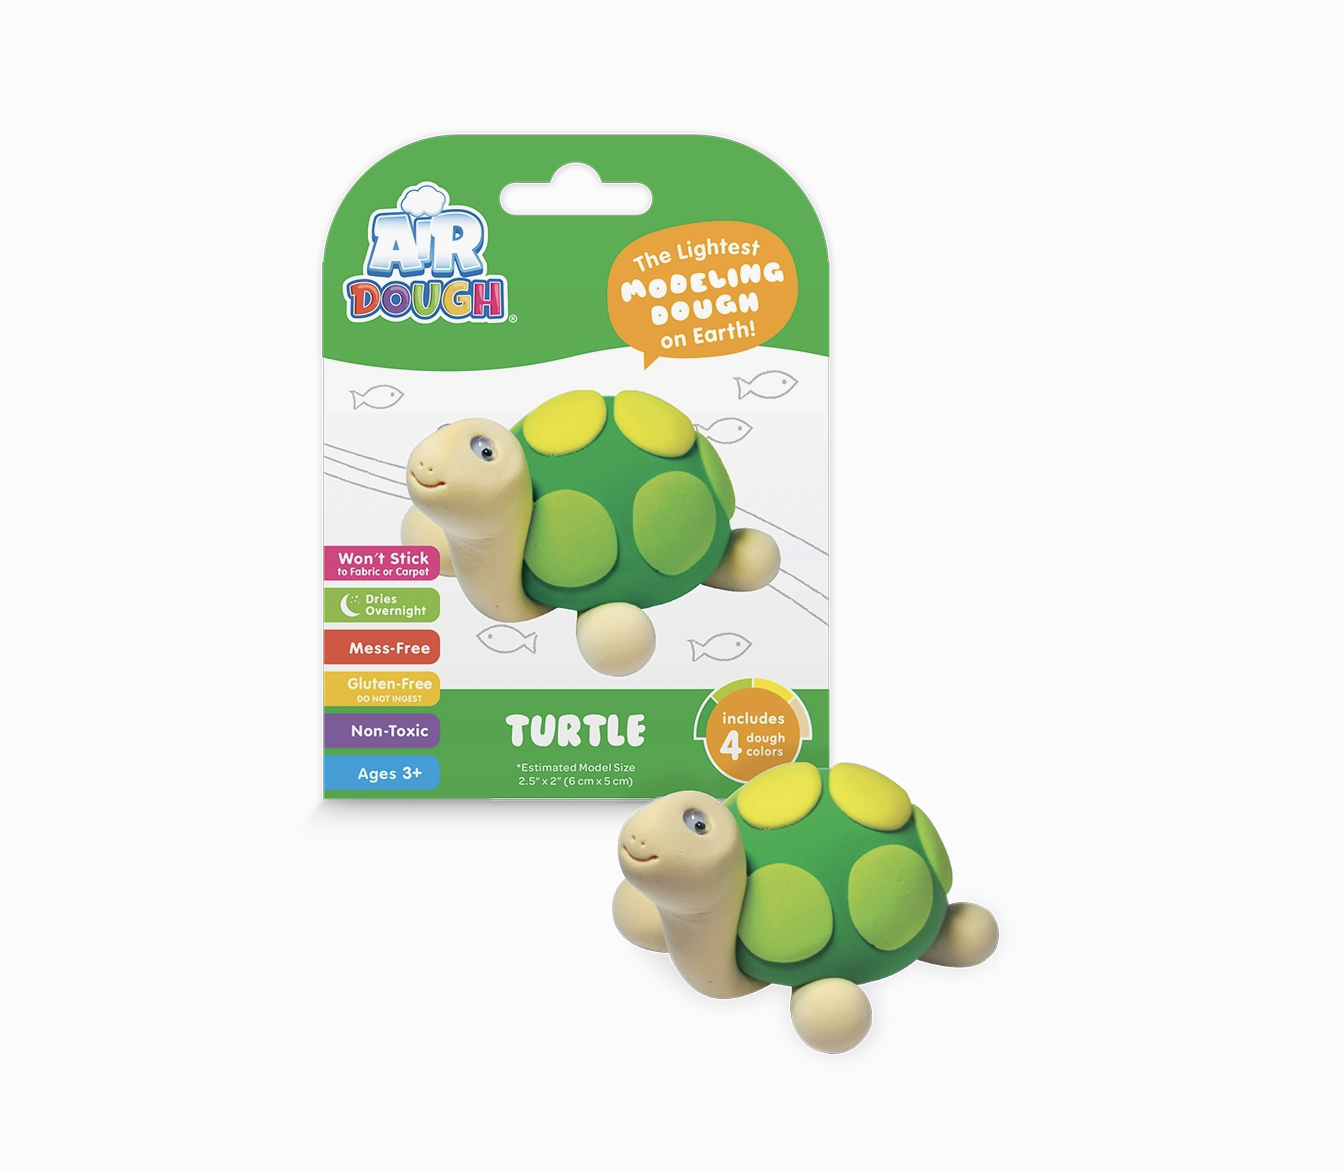 Air Dough "Turtle" Modeling Clay